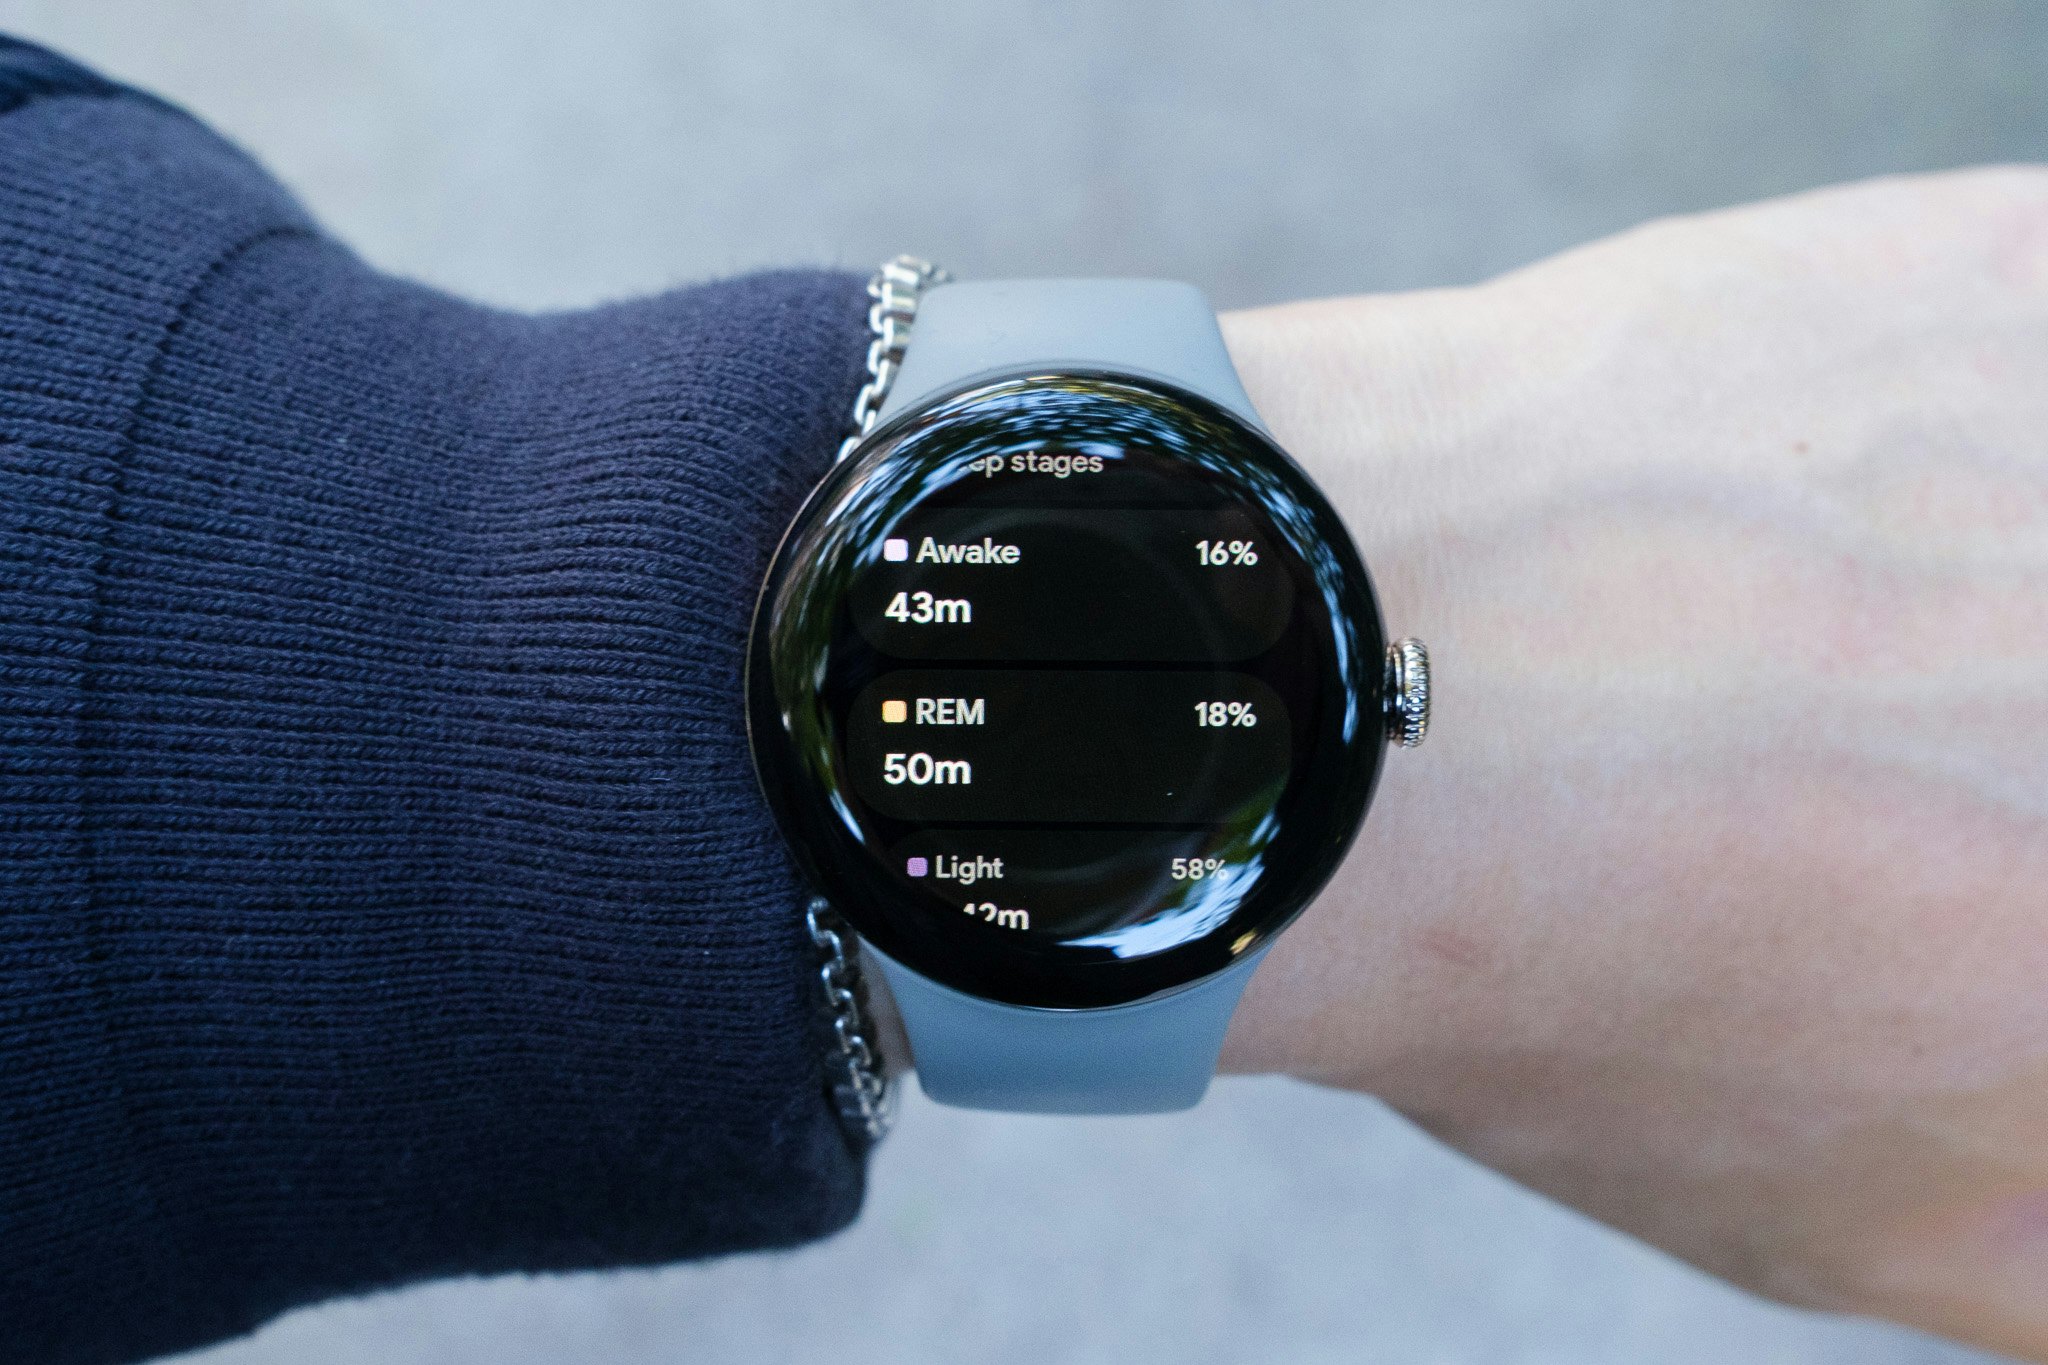 Google Pixel Watch 2 review: On the right track